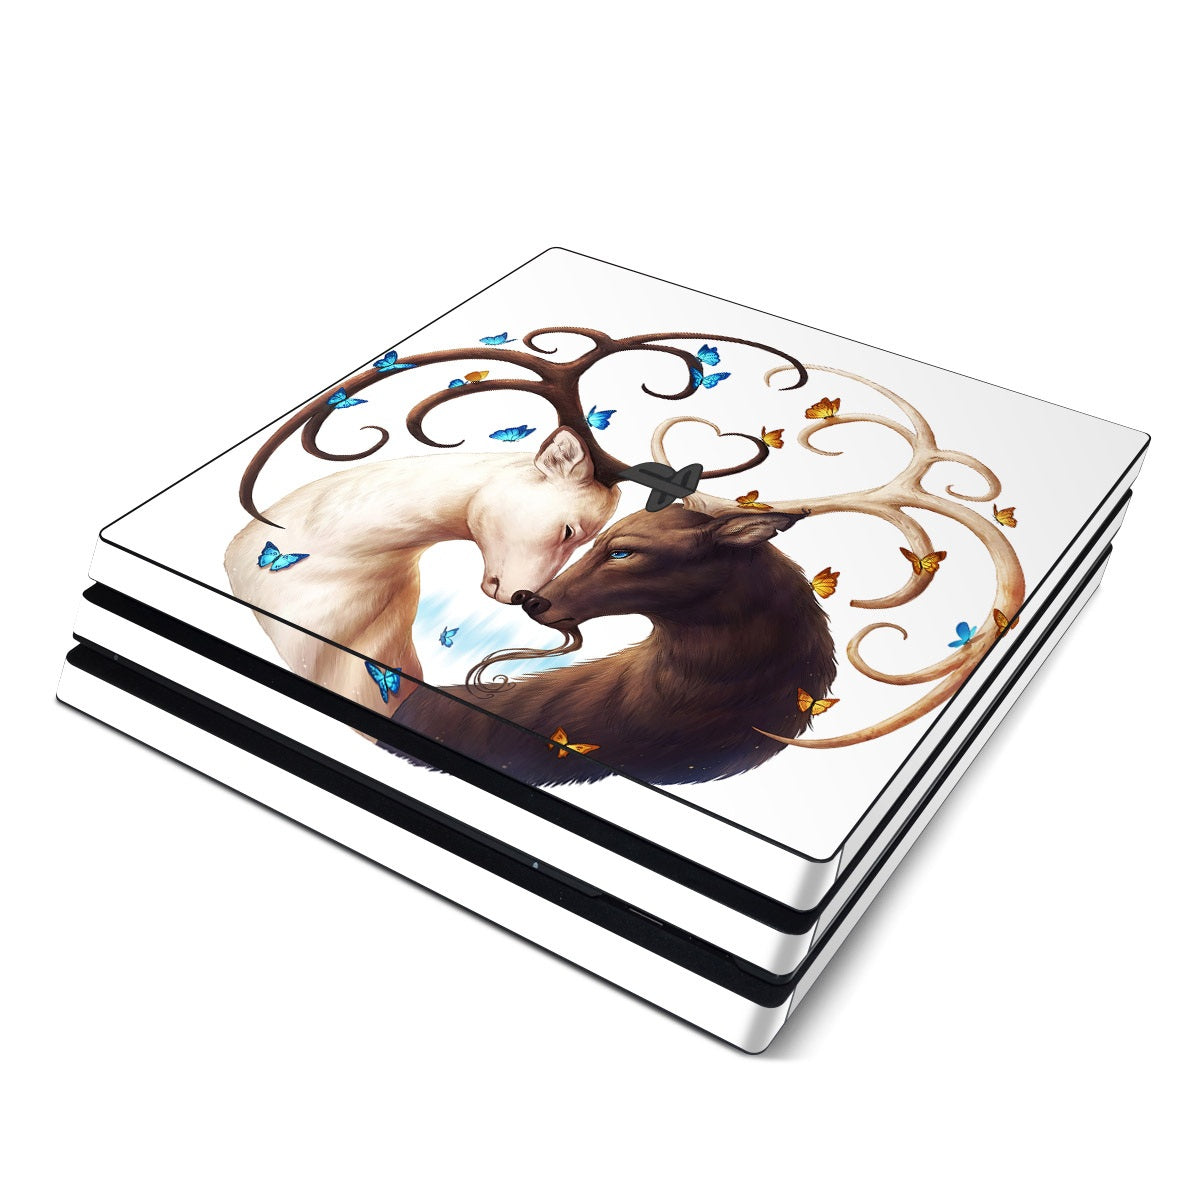 Circle of Life - Sony PS4 Pro Skin